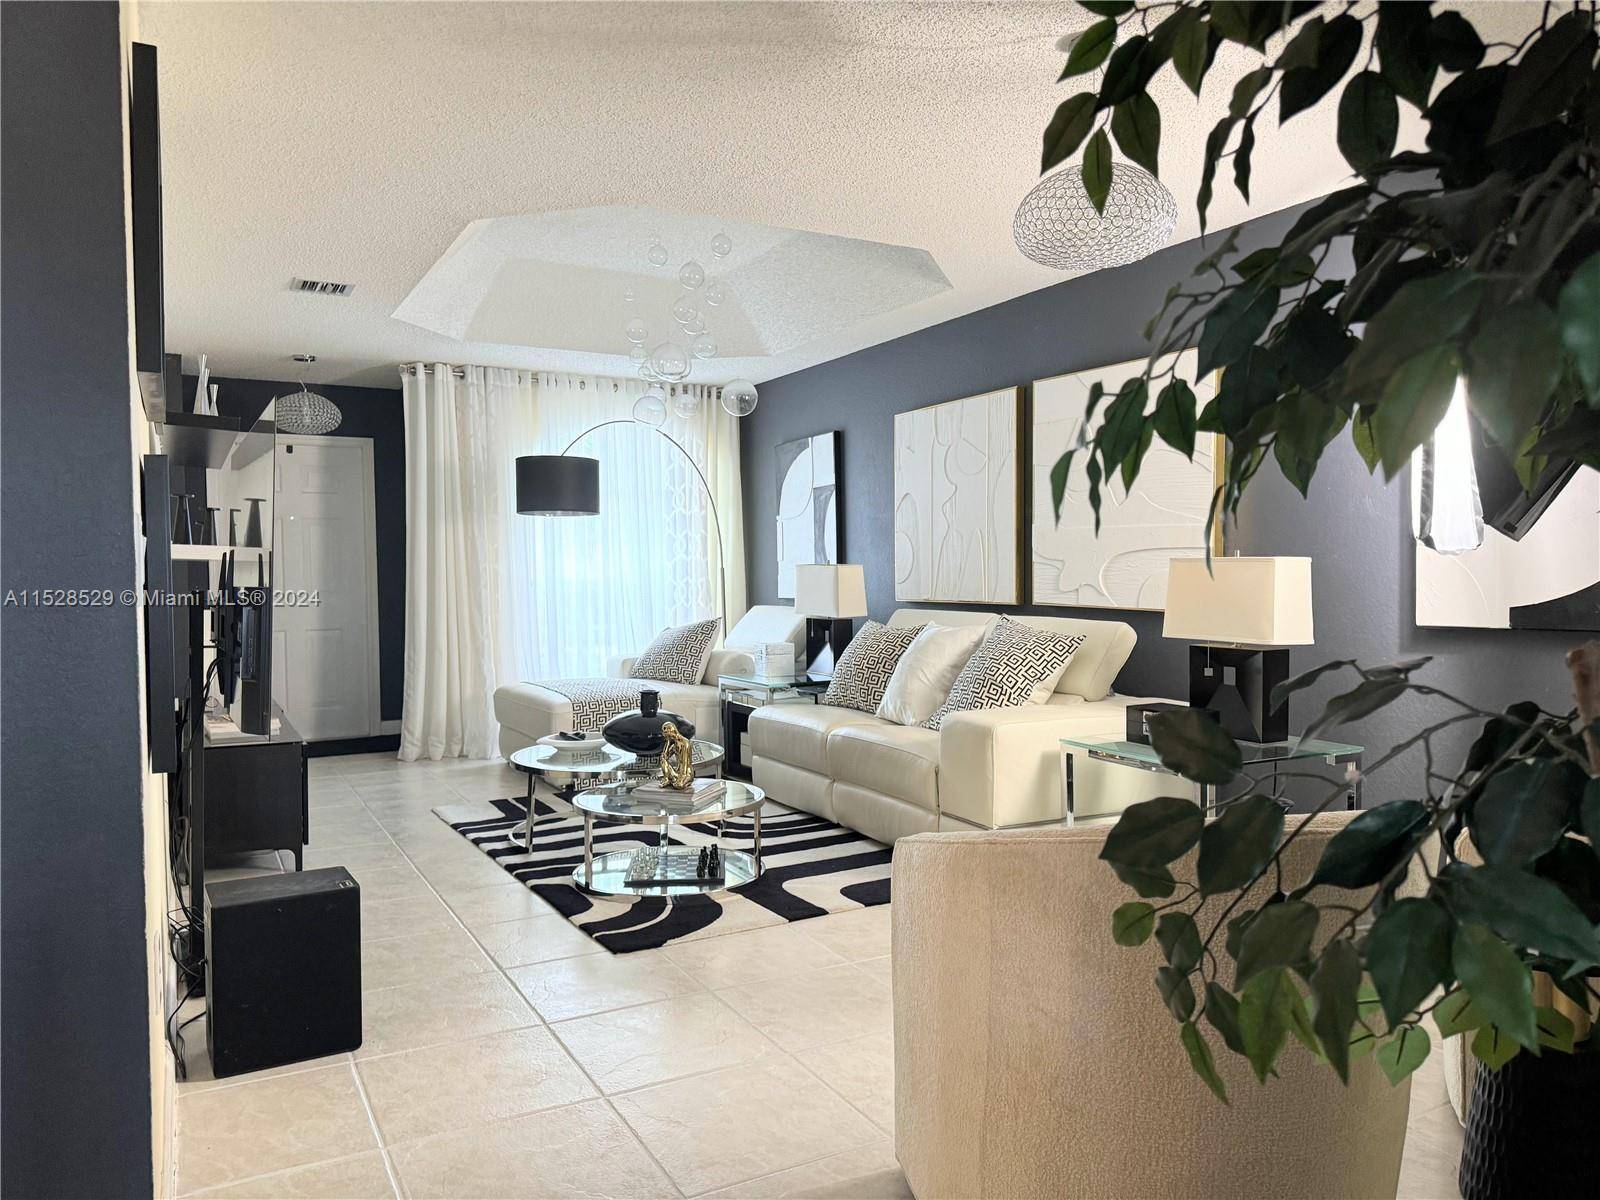 Step into the charm of this beautiful, elegant, and meticulously upgraded townhouse at Doral Landings.